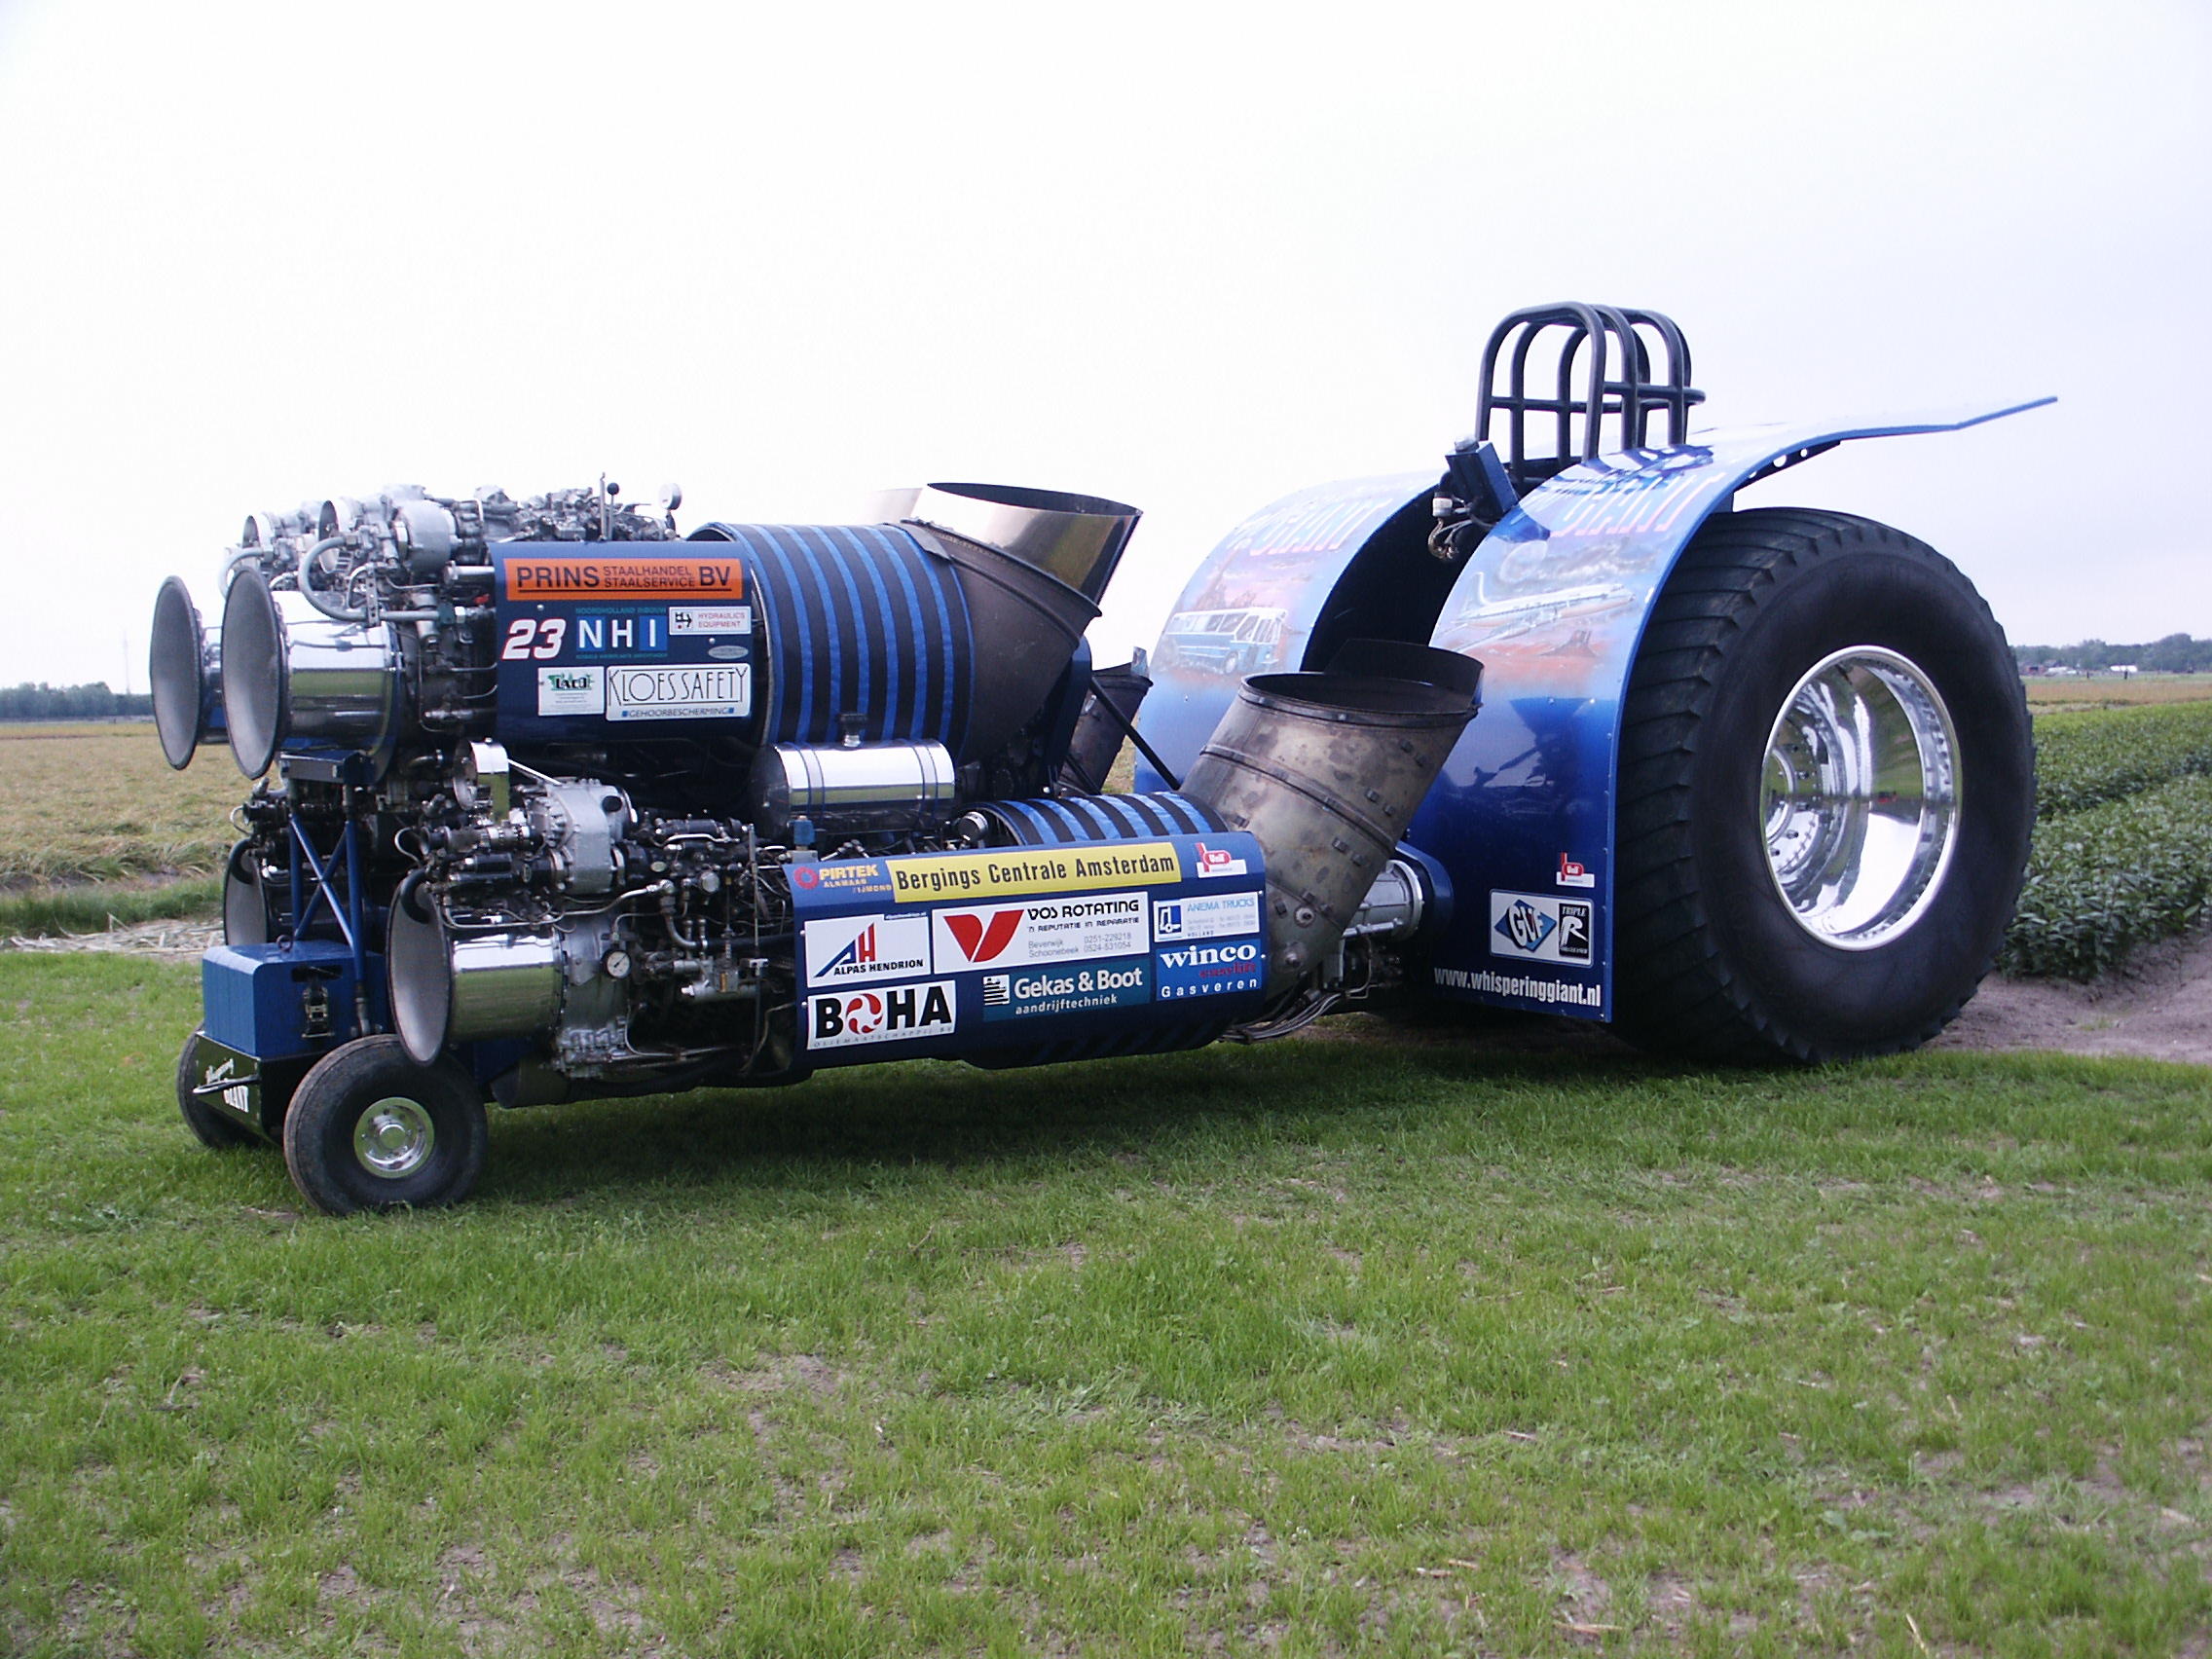  PULLING race racing hot rod rods tractor engine jet j wallpaper 2272x1704